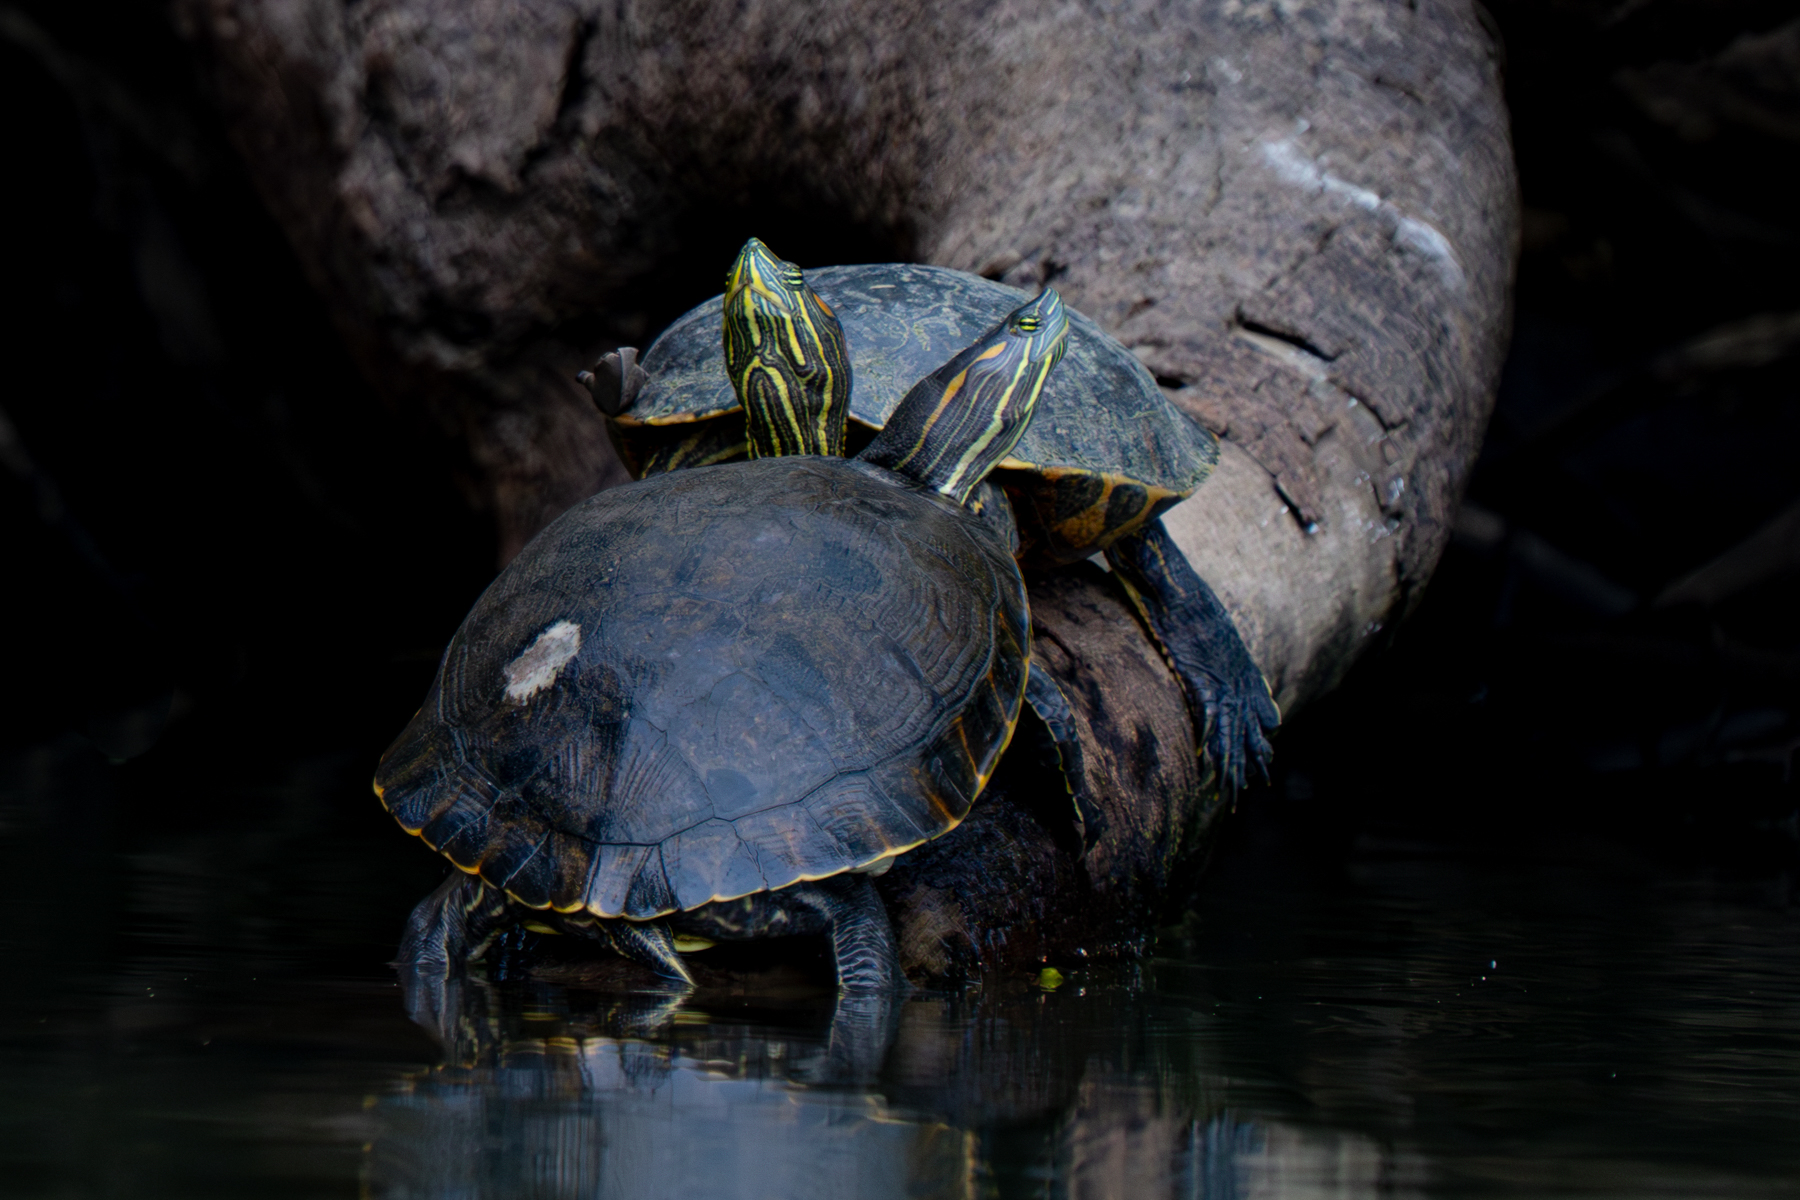 A pair of Nicaraguan Slider Turtles on the side of the Rio Frio (image by Inger Vandyke)